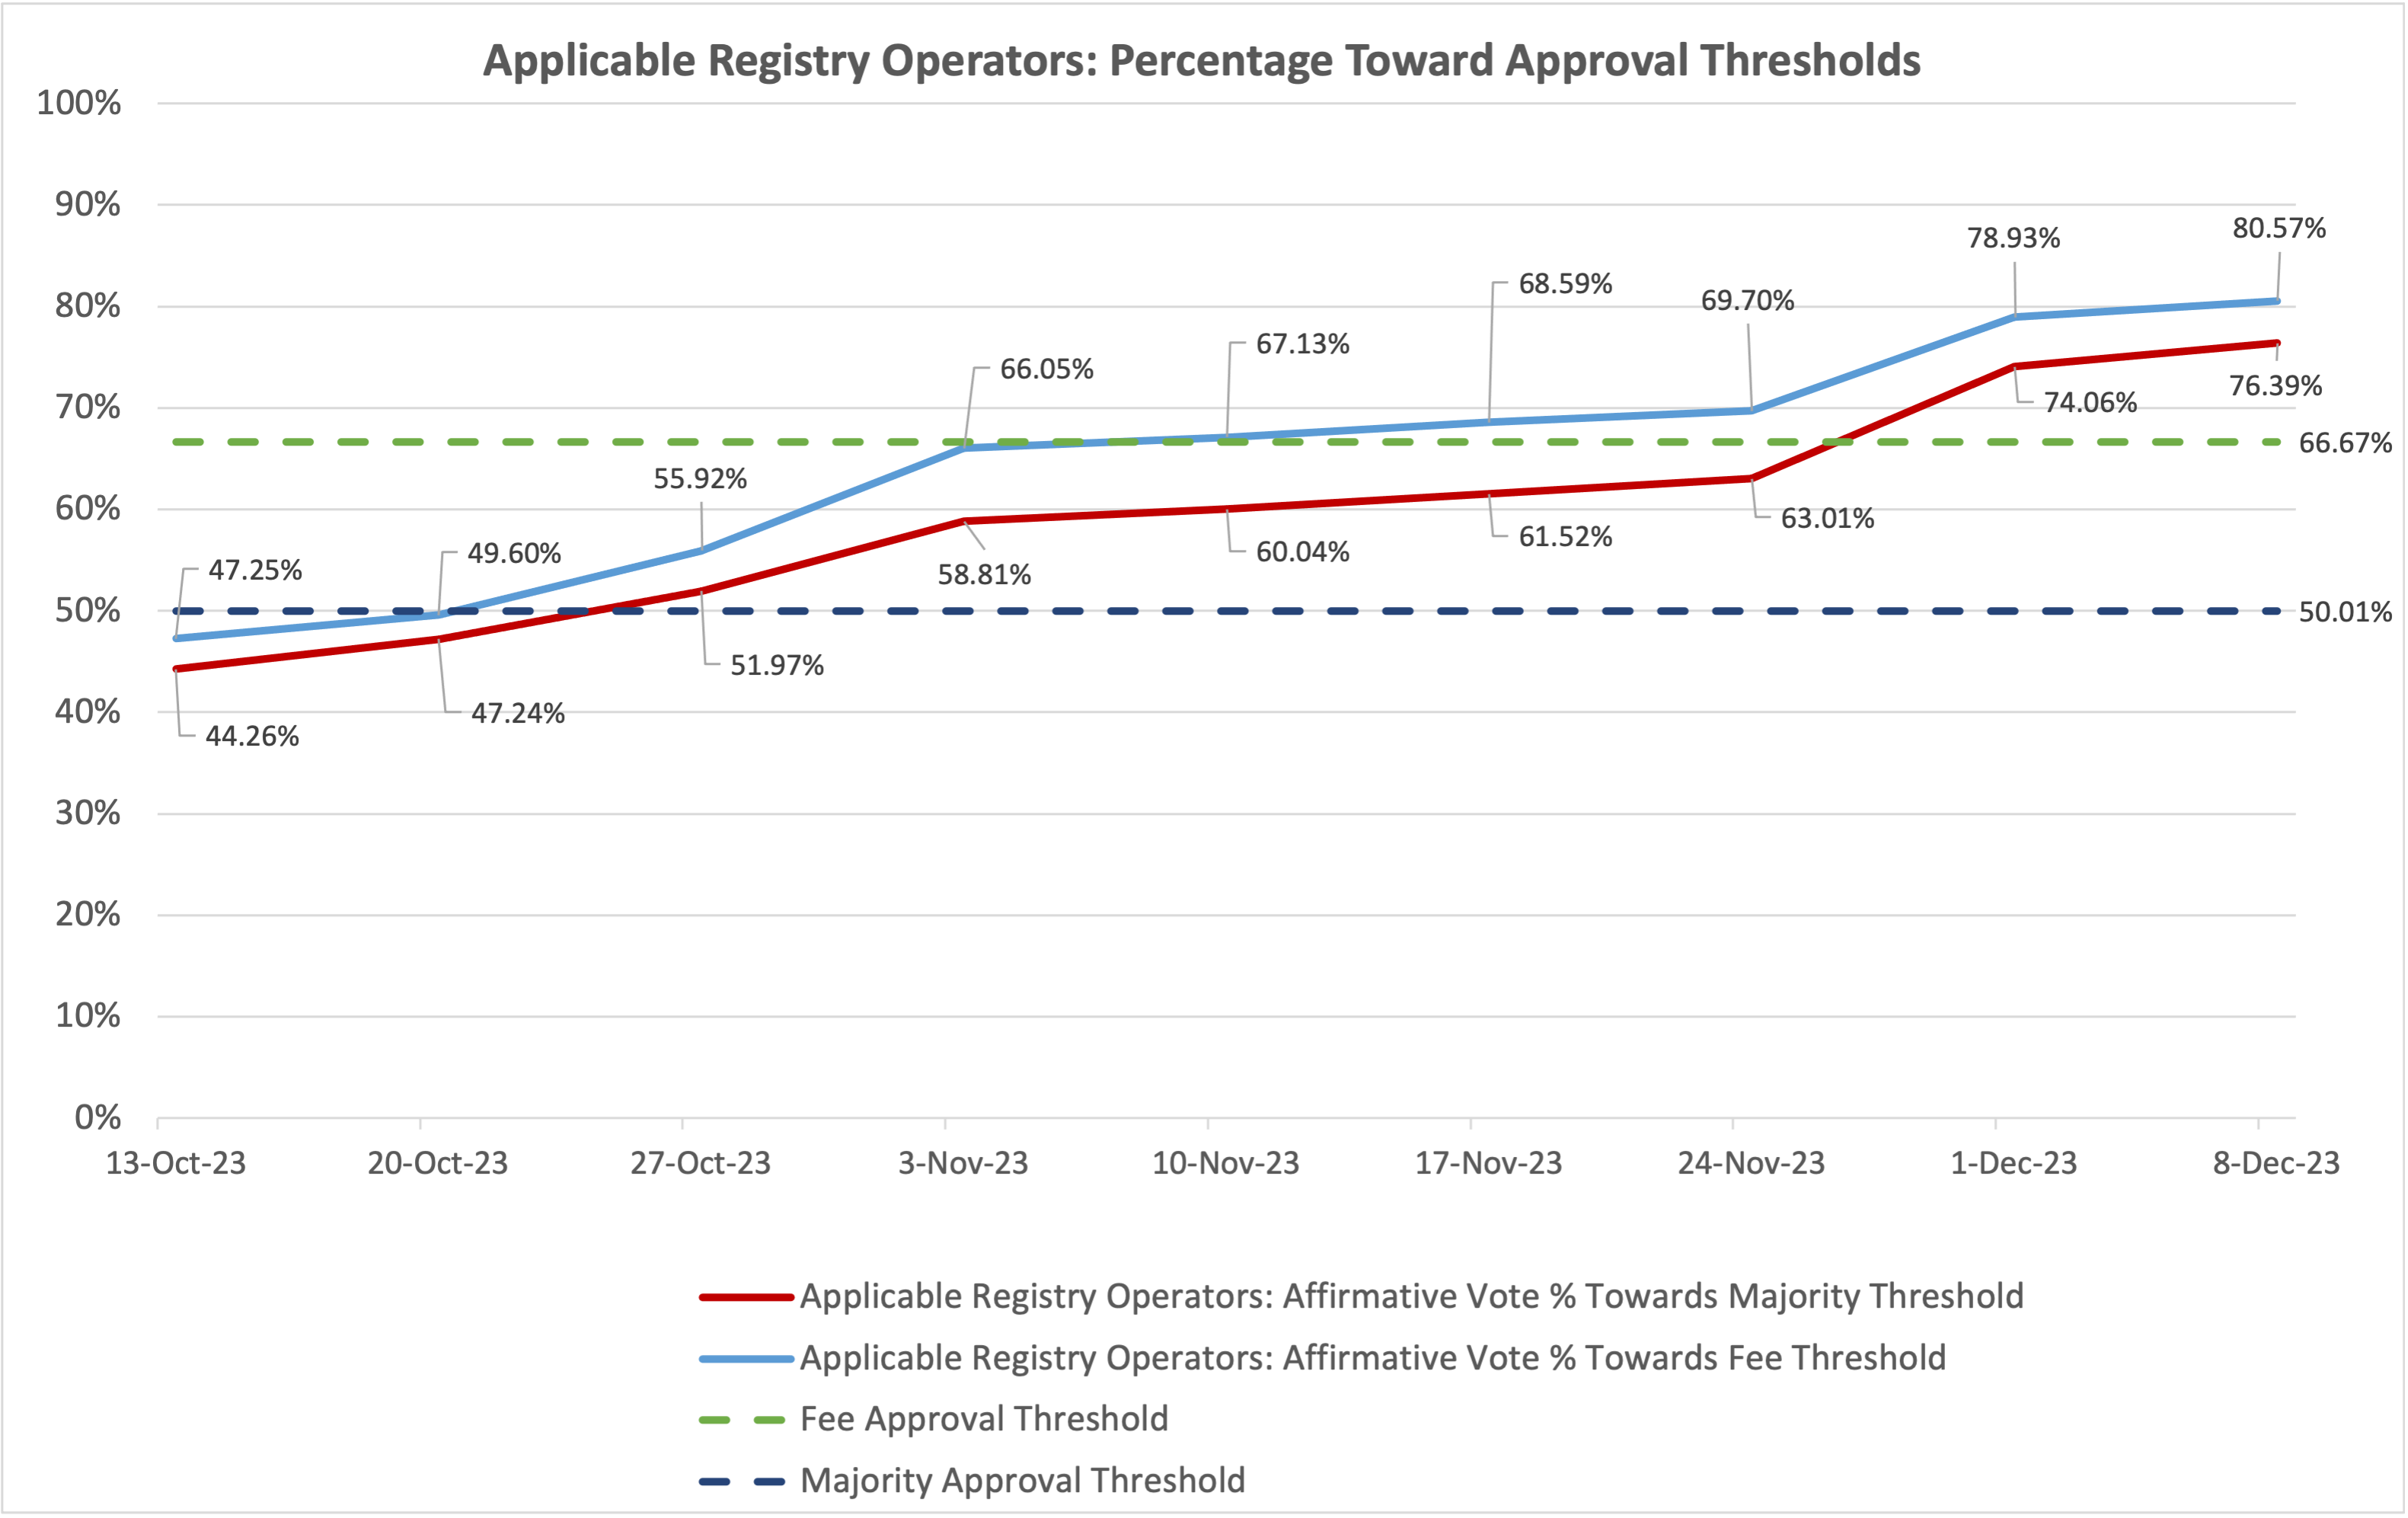 Line chart of the progress of the vote towards meeting the fee and majority threshold for Applicable Registry Operators, where the fee threshold is 66.67% and the majority threshold is 50.01%. The data shows that as of the 8th of December 2023, the affirmative vote towards the fee approval threshold is at 80.57% and the affirmative vote towards the majority approval threshold is at 76.39%